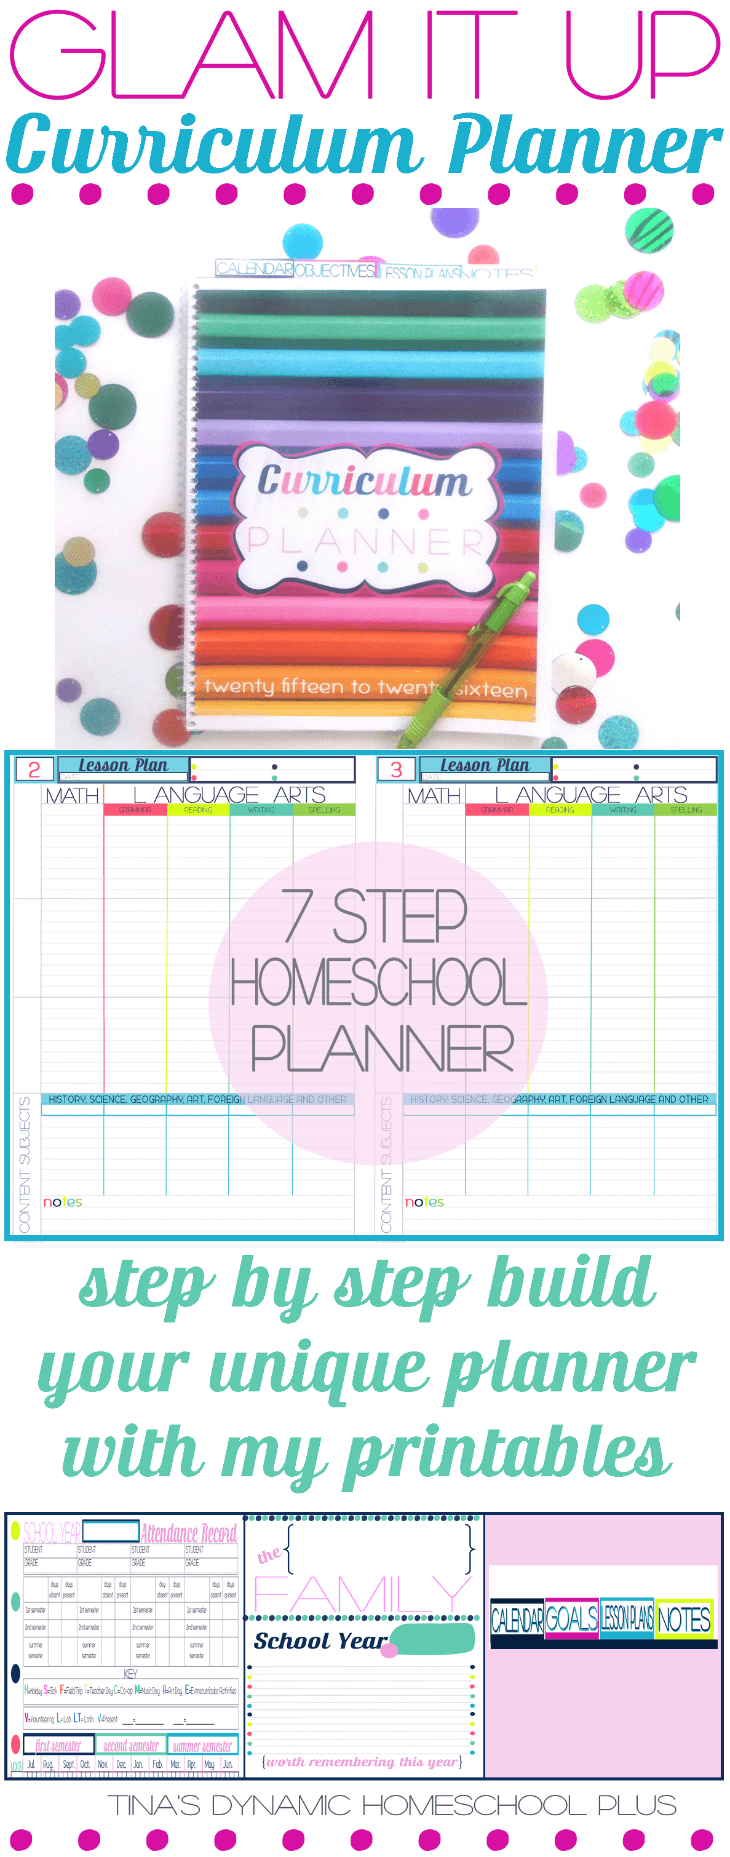 Glam It Up Homeschool Planner. Beautiful color pages, awesome detailed and timeless! Scoot by to grab it @ Tina's Dynamic Homeschool Planner